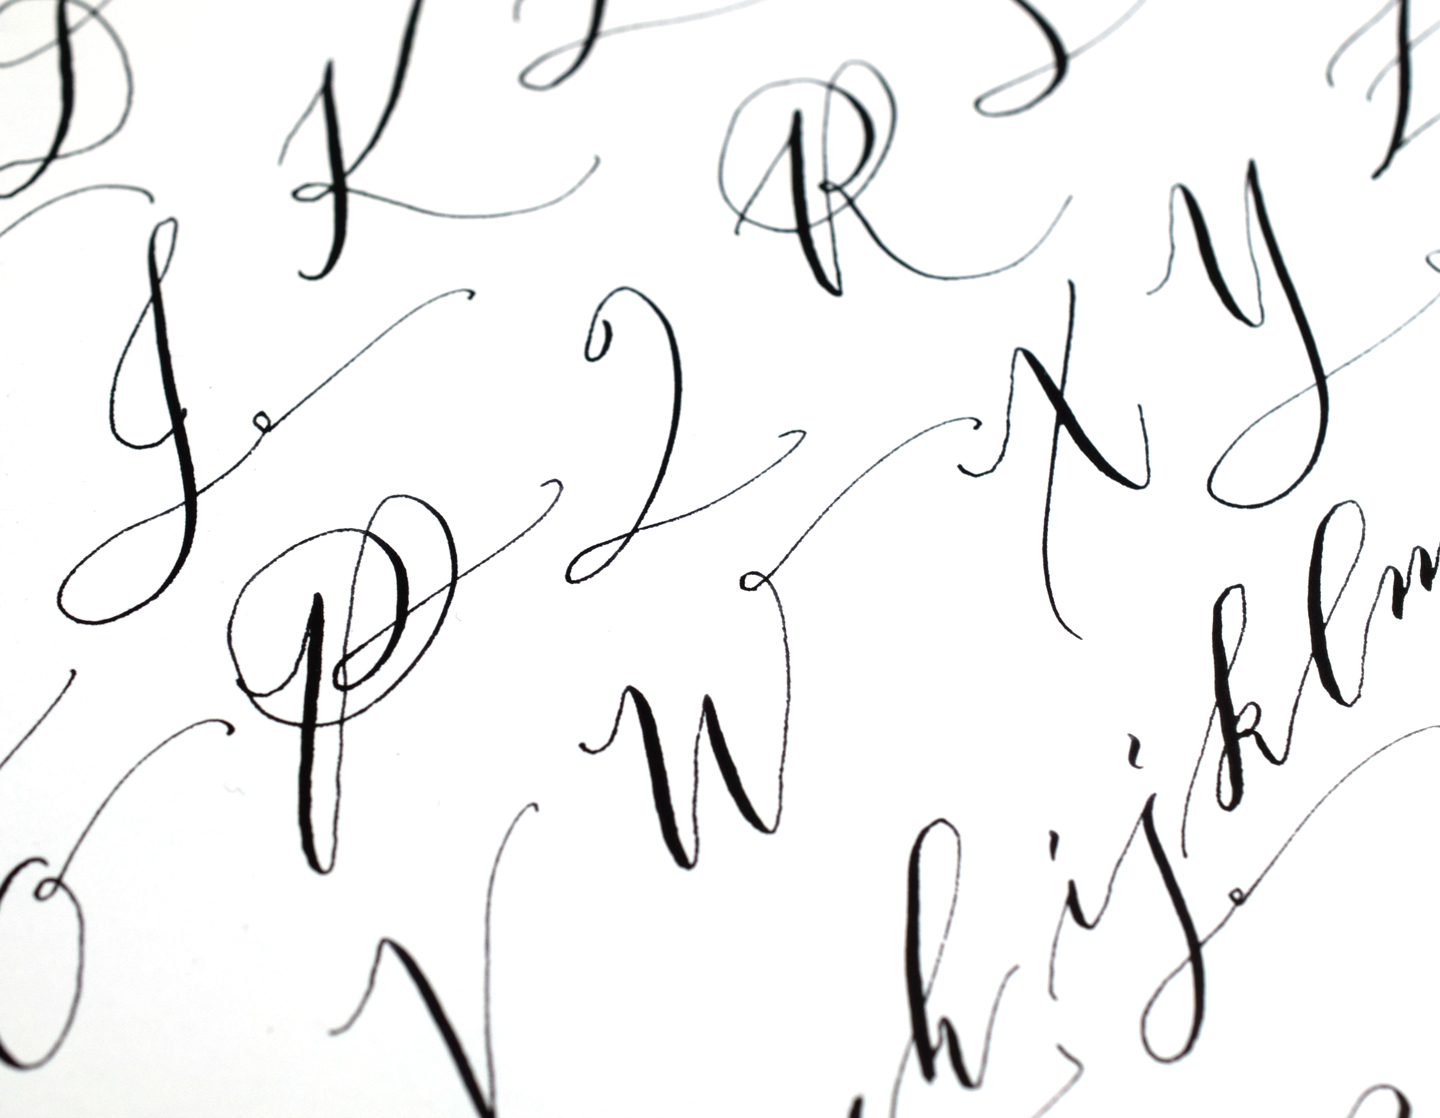 Seven Reasons to Learn Calligraphy – The Postman's Knock